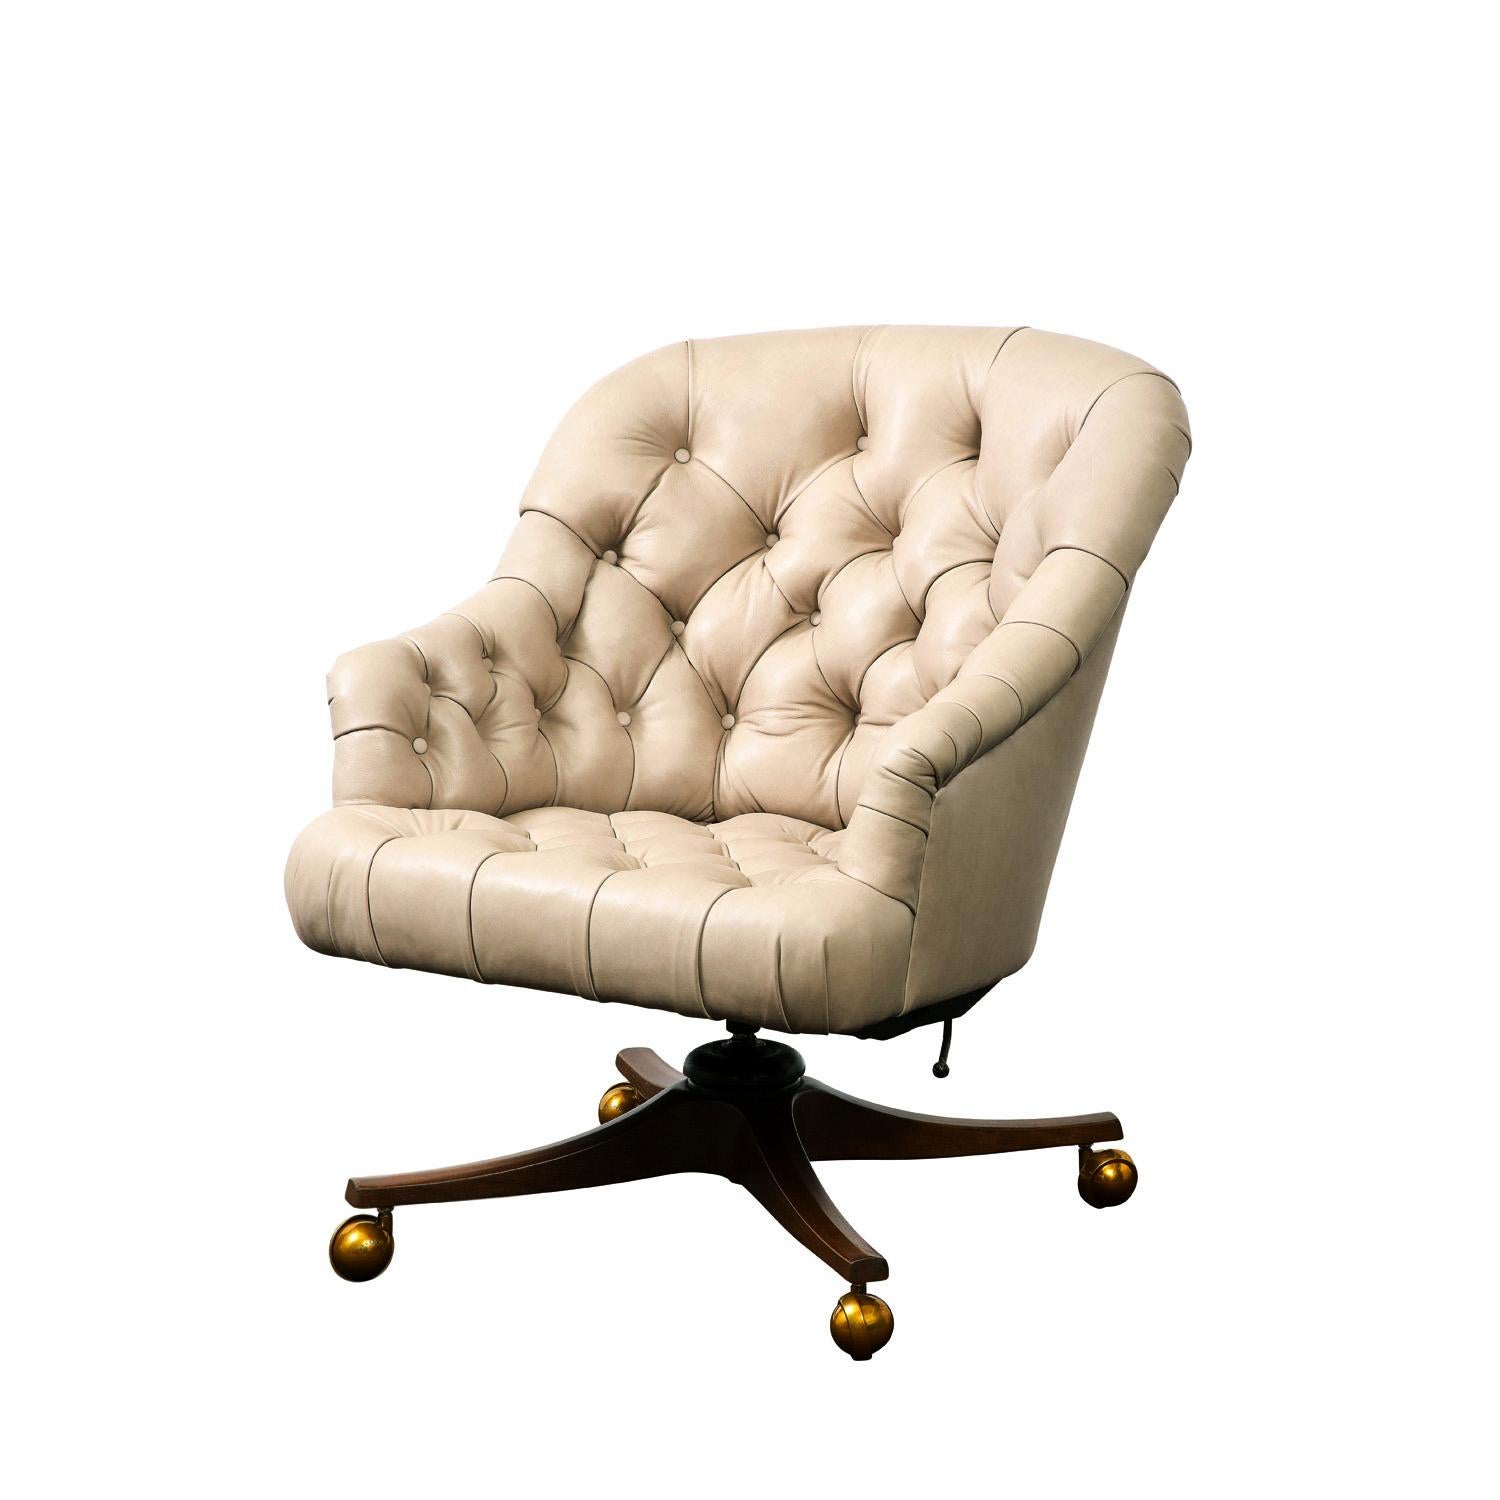 Beautifully made “Barrel Tufted Desk Chair” model no 5400 in newly reupholstered calf skin leather with mahogany base with brass castors by Edward Wormley for Dunbar, American, 1954. This iconic desk chair is extremely comfortable and reclines. It’s